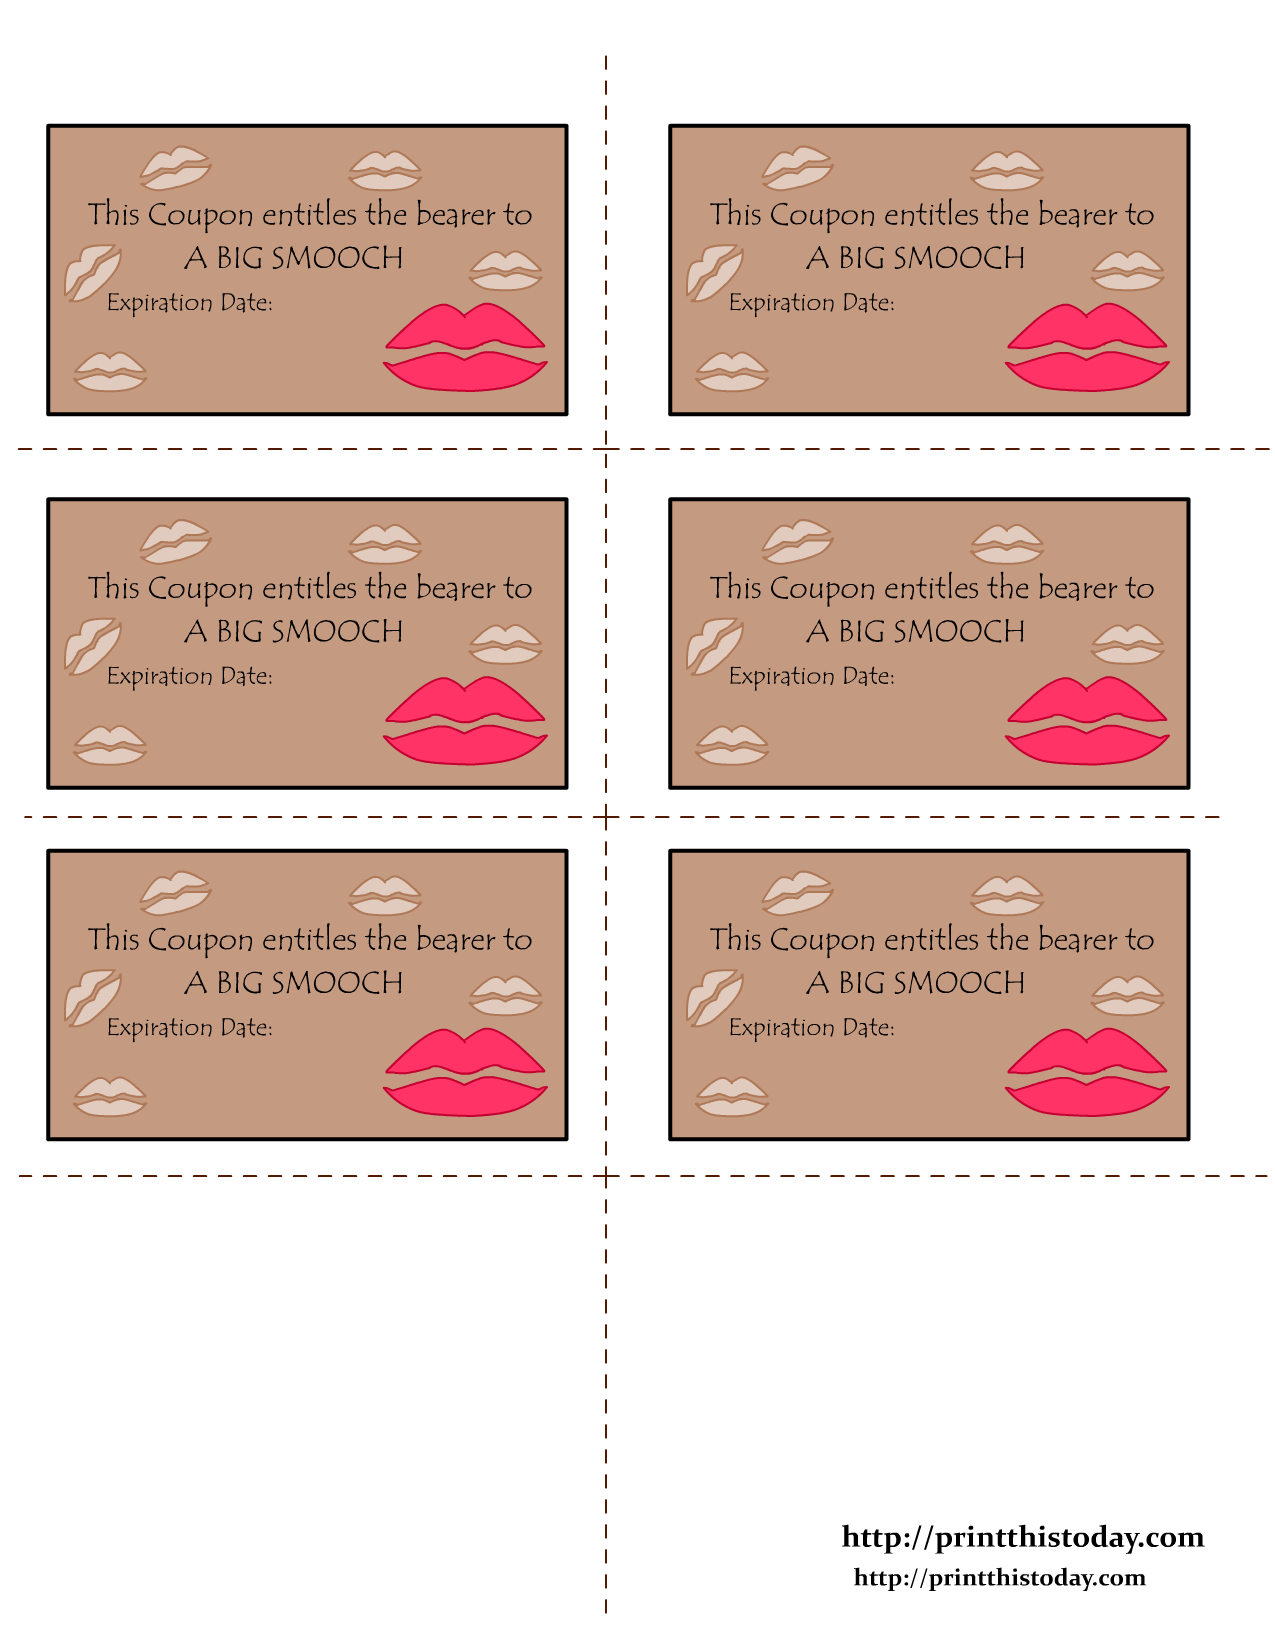 Free Printable Valentine Coupons | Date Night | Love Coupons, Love - Free Printable Coupons For Husband